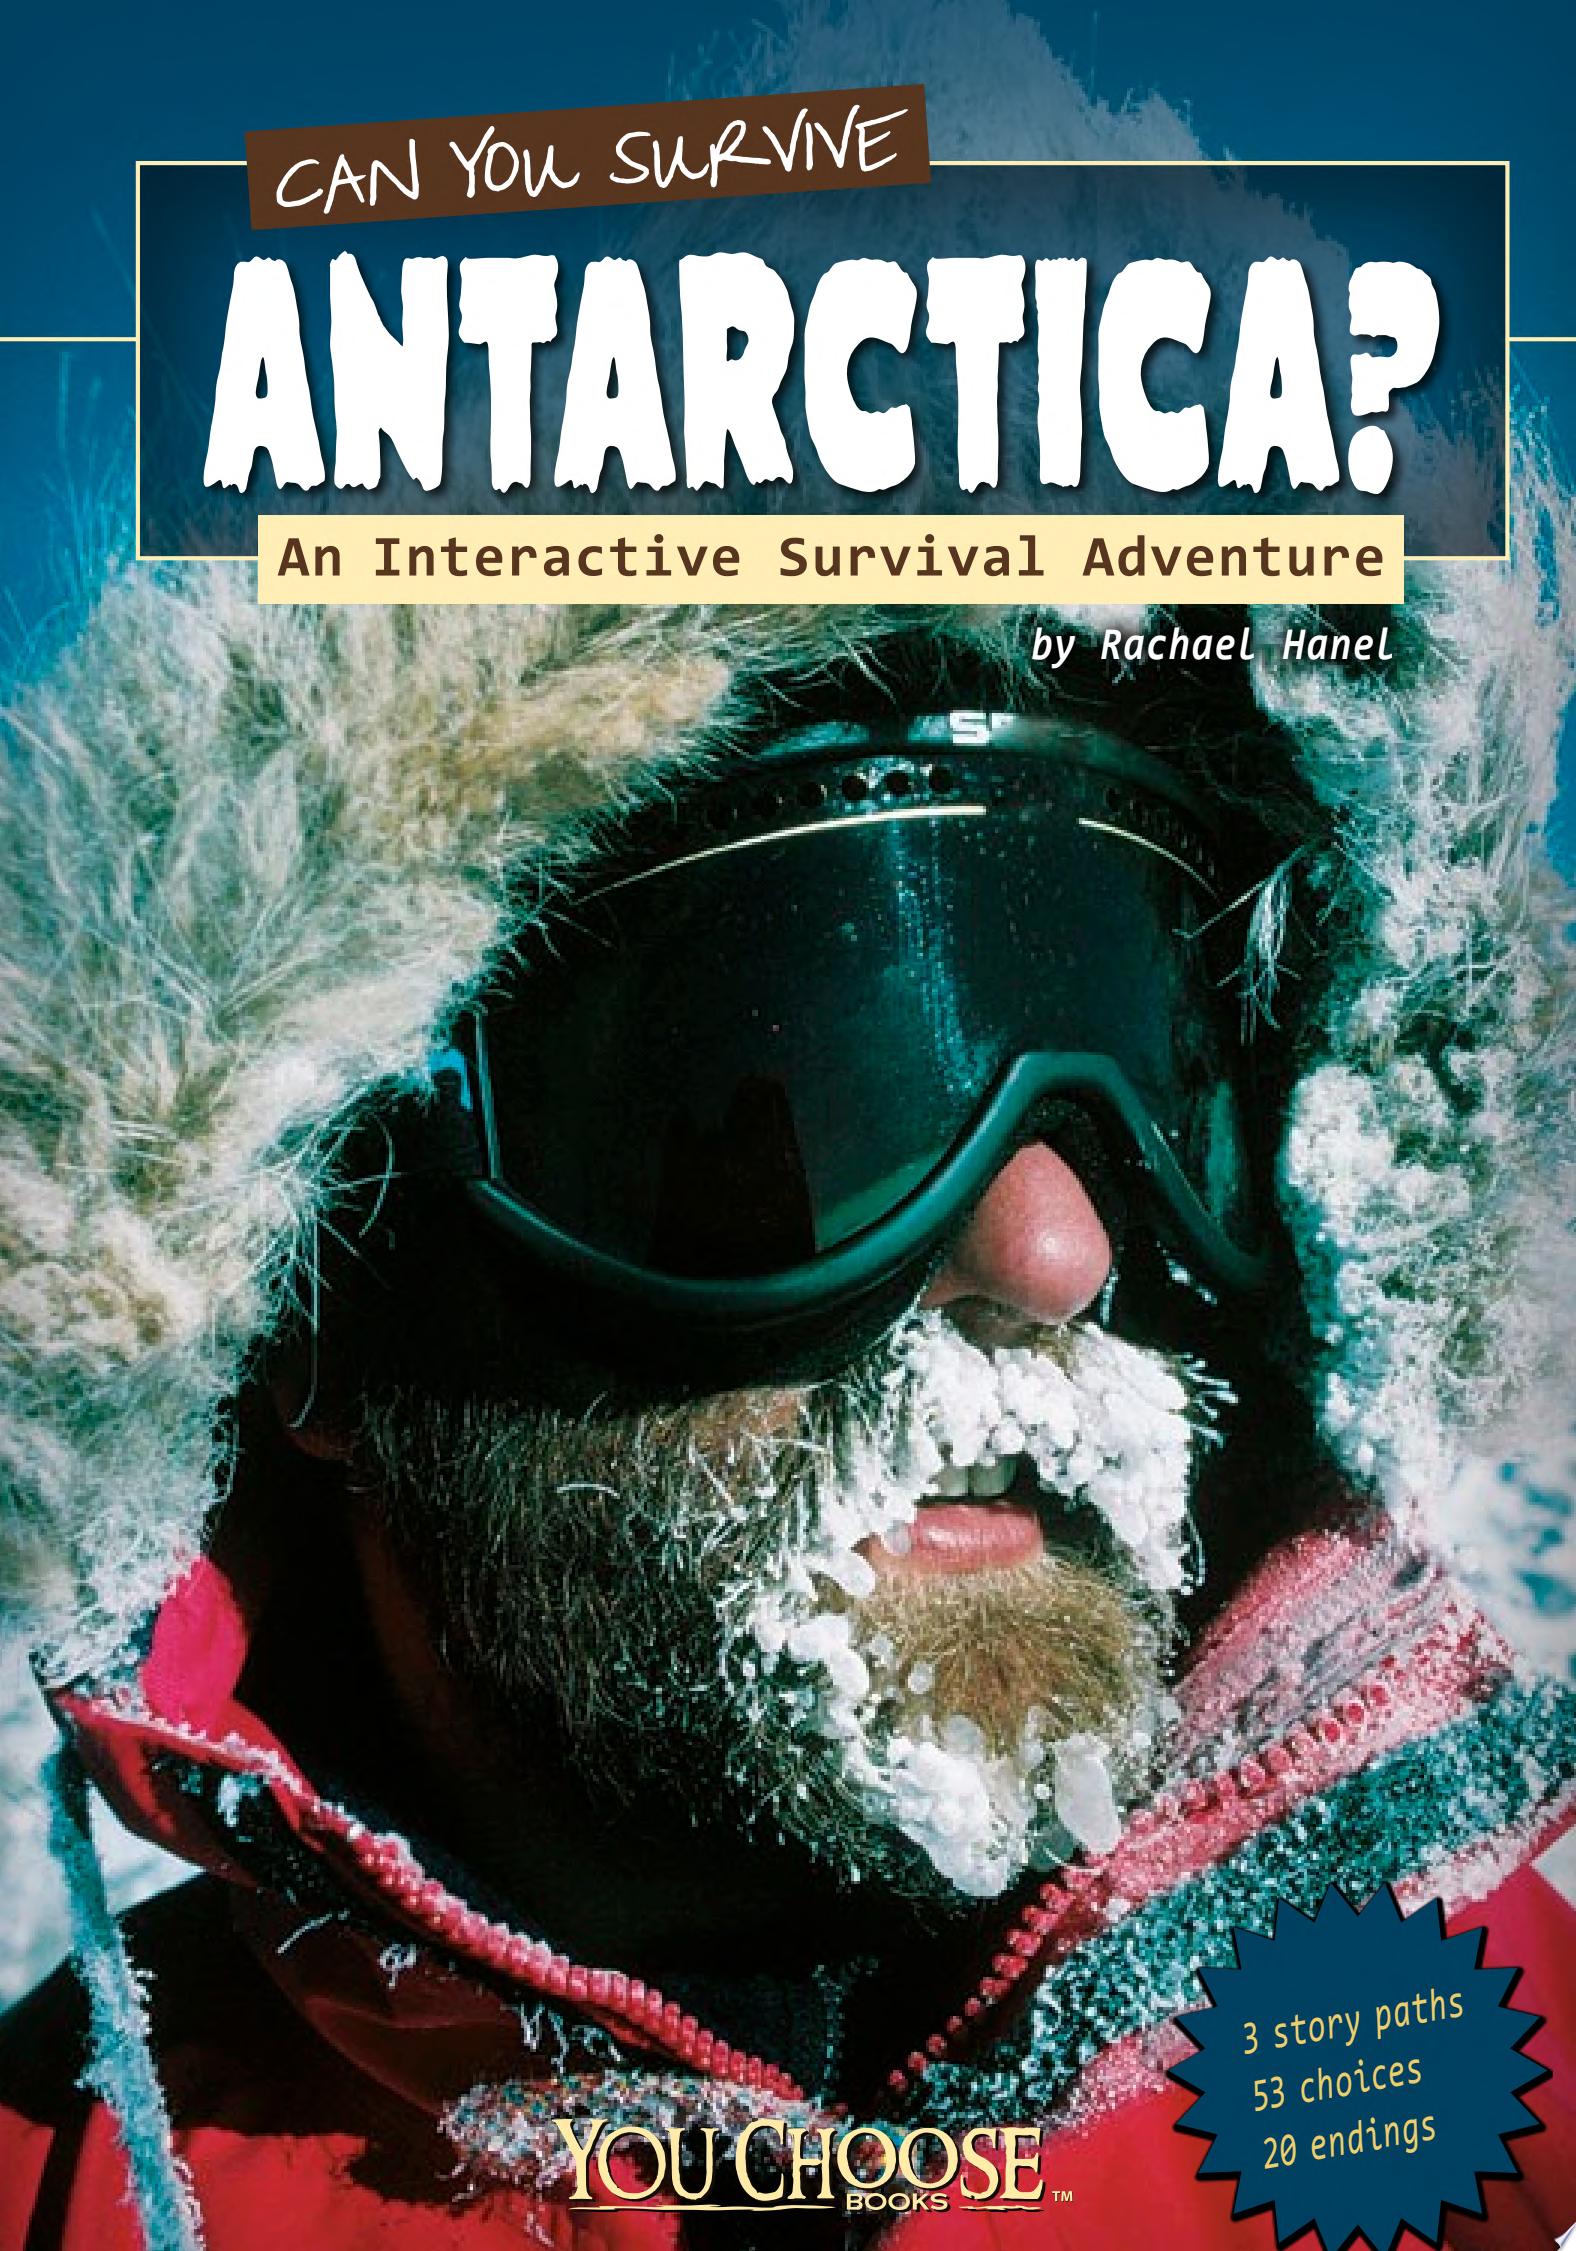 Image for "Can You Survive Antarctica?"